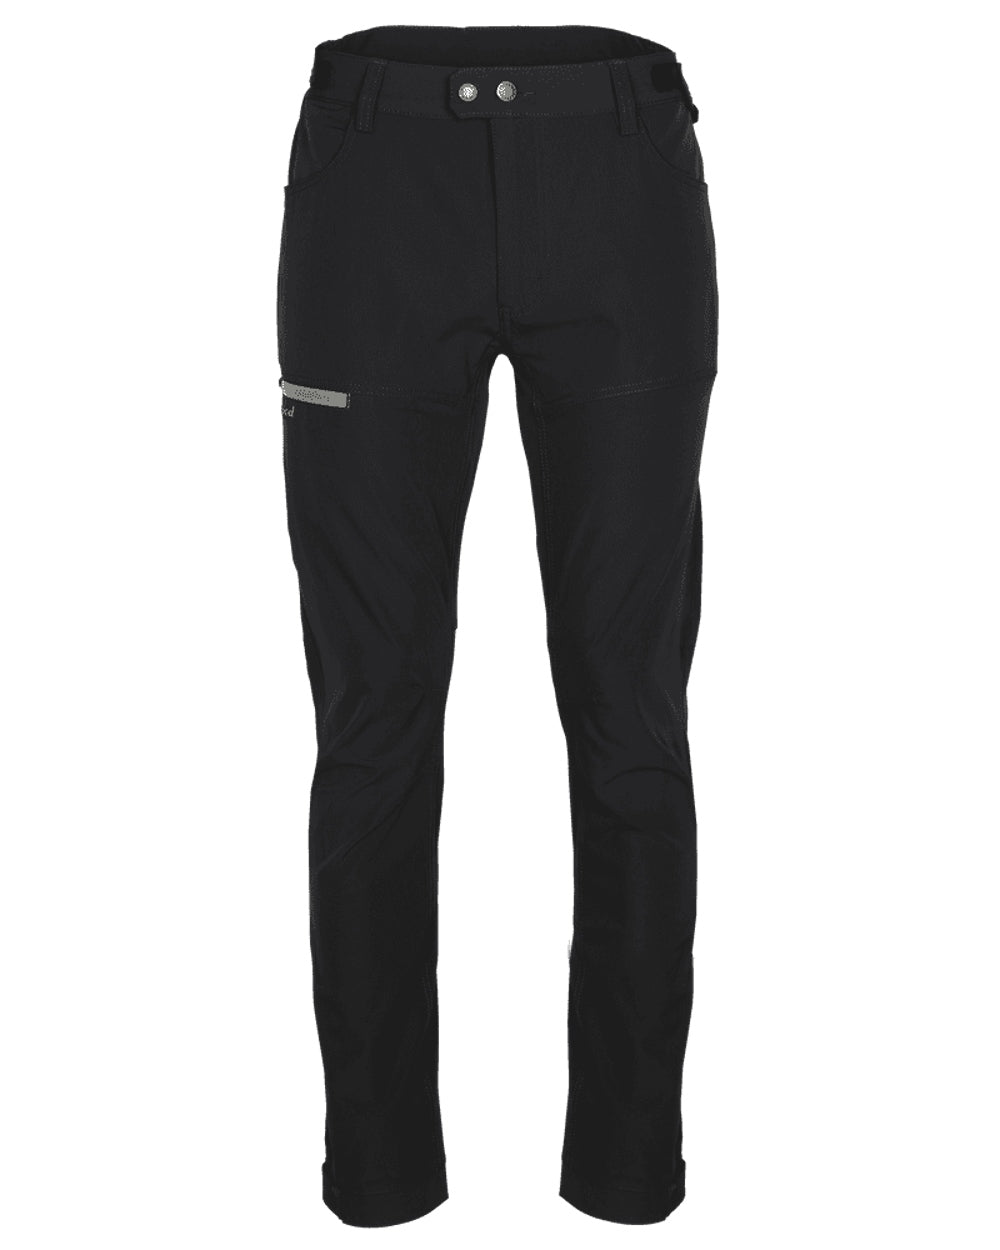 Pinewood Mens Finnveden Trail Stretch Trousers in Black 